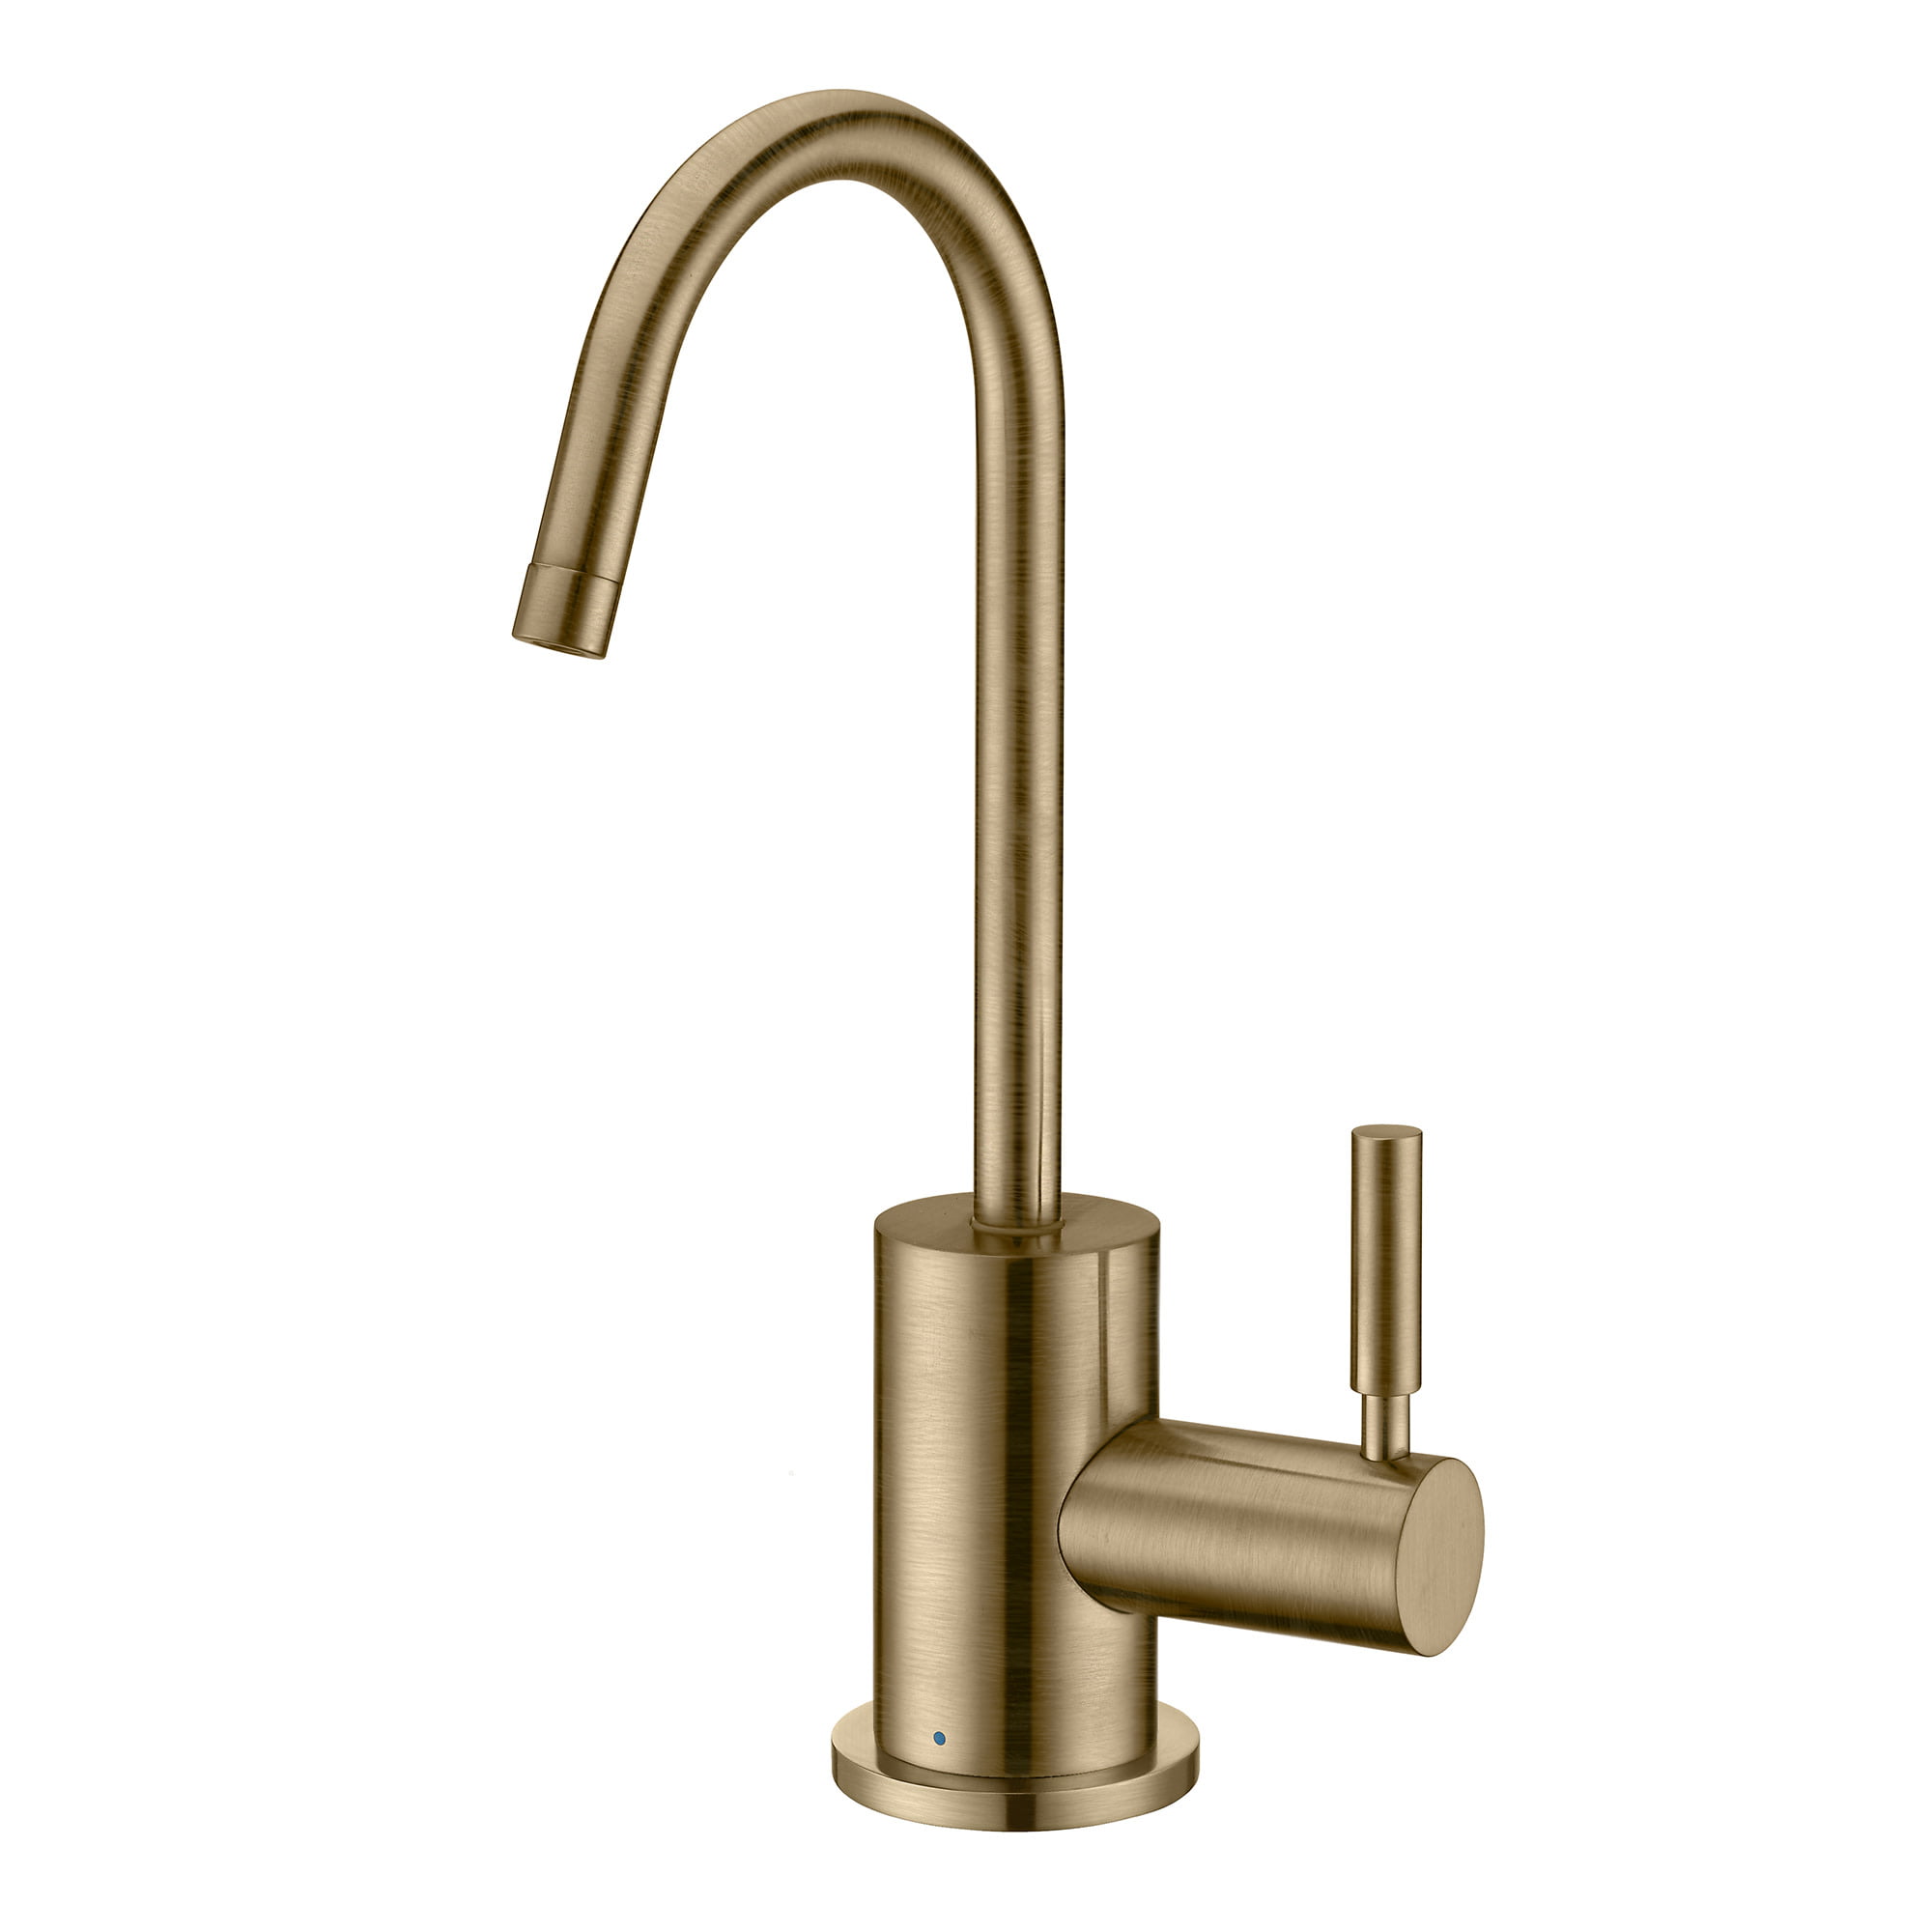 Picture of Alfi Trade WHFH-C1010-AB Point of Use Cold Water Drinking Faucet with Gooseneck Swivel Spout - Antique Brass